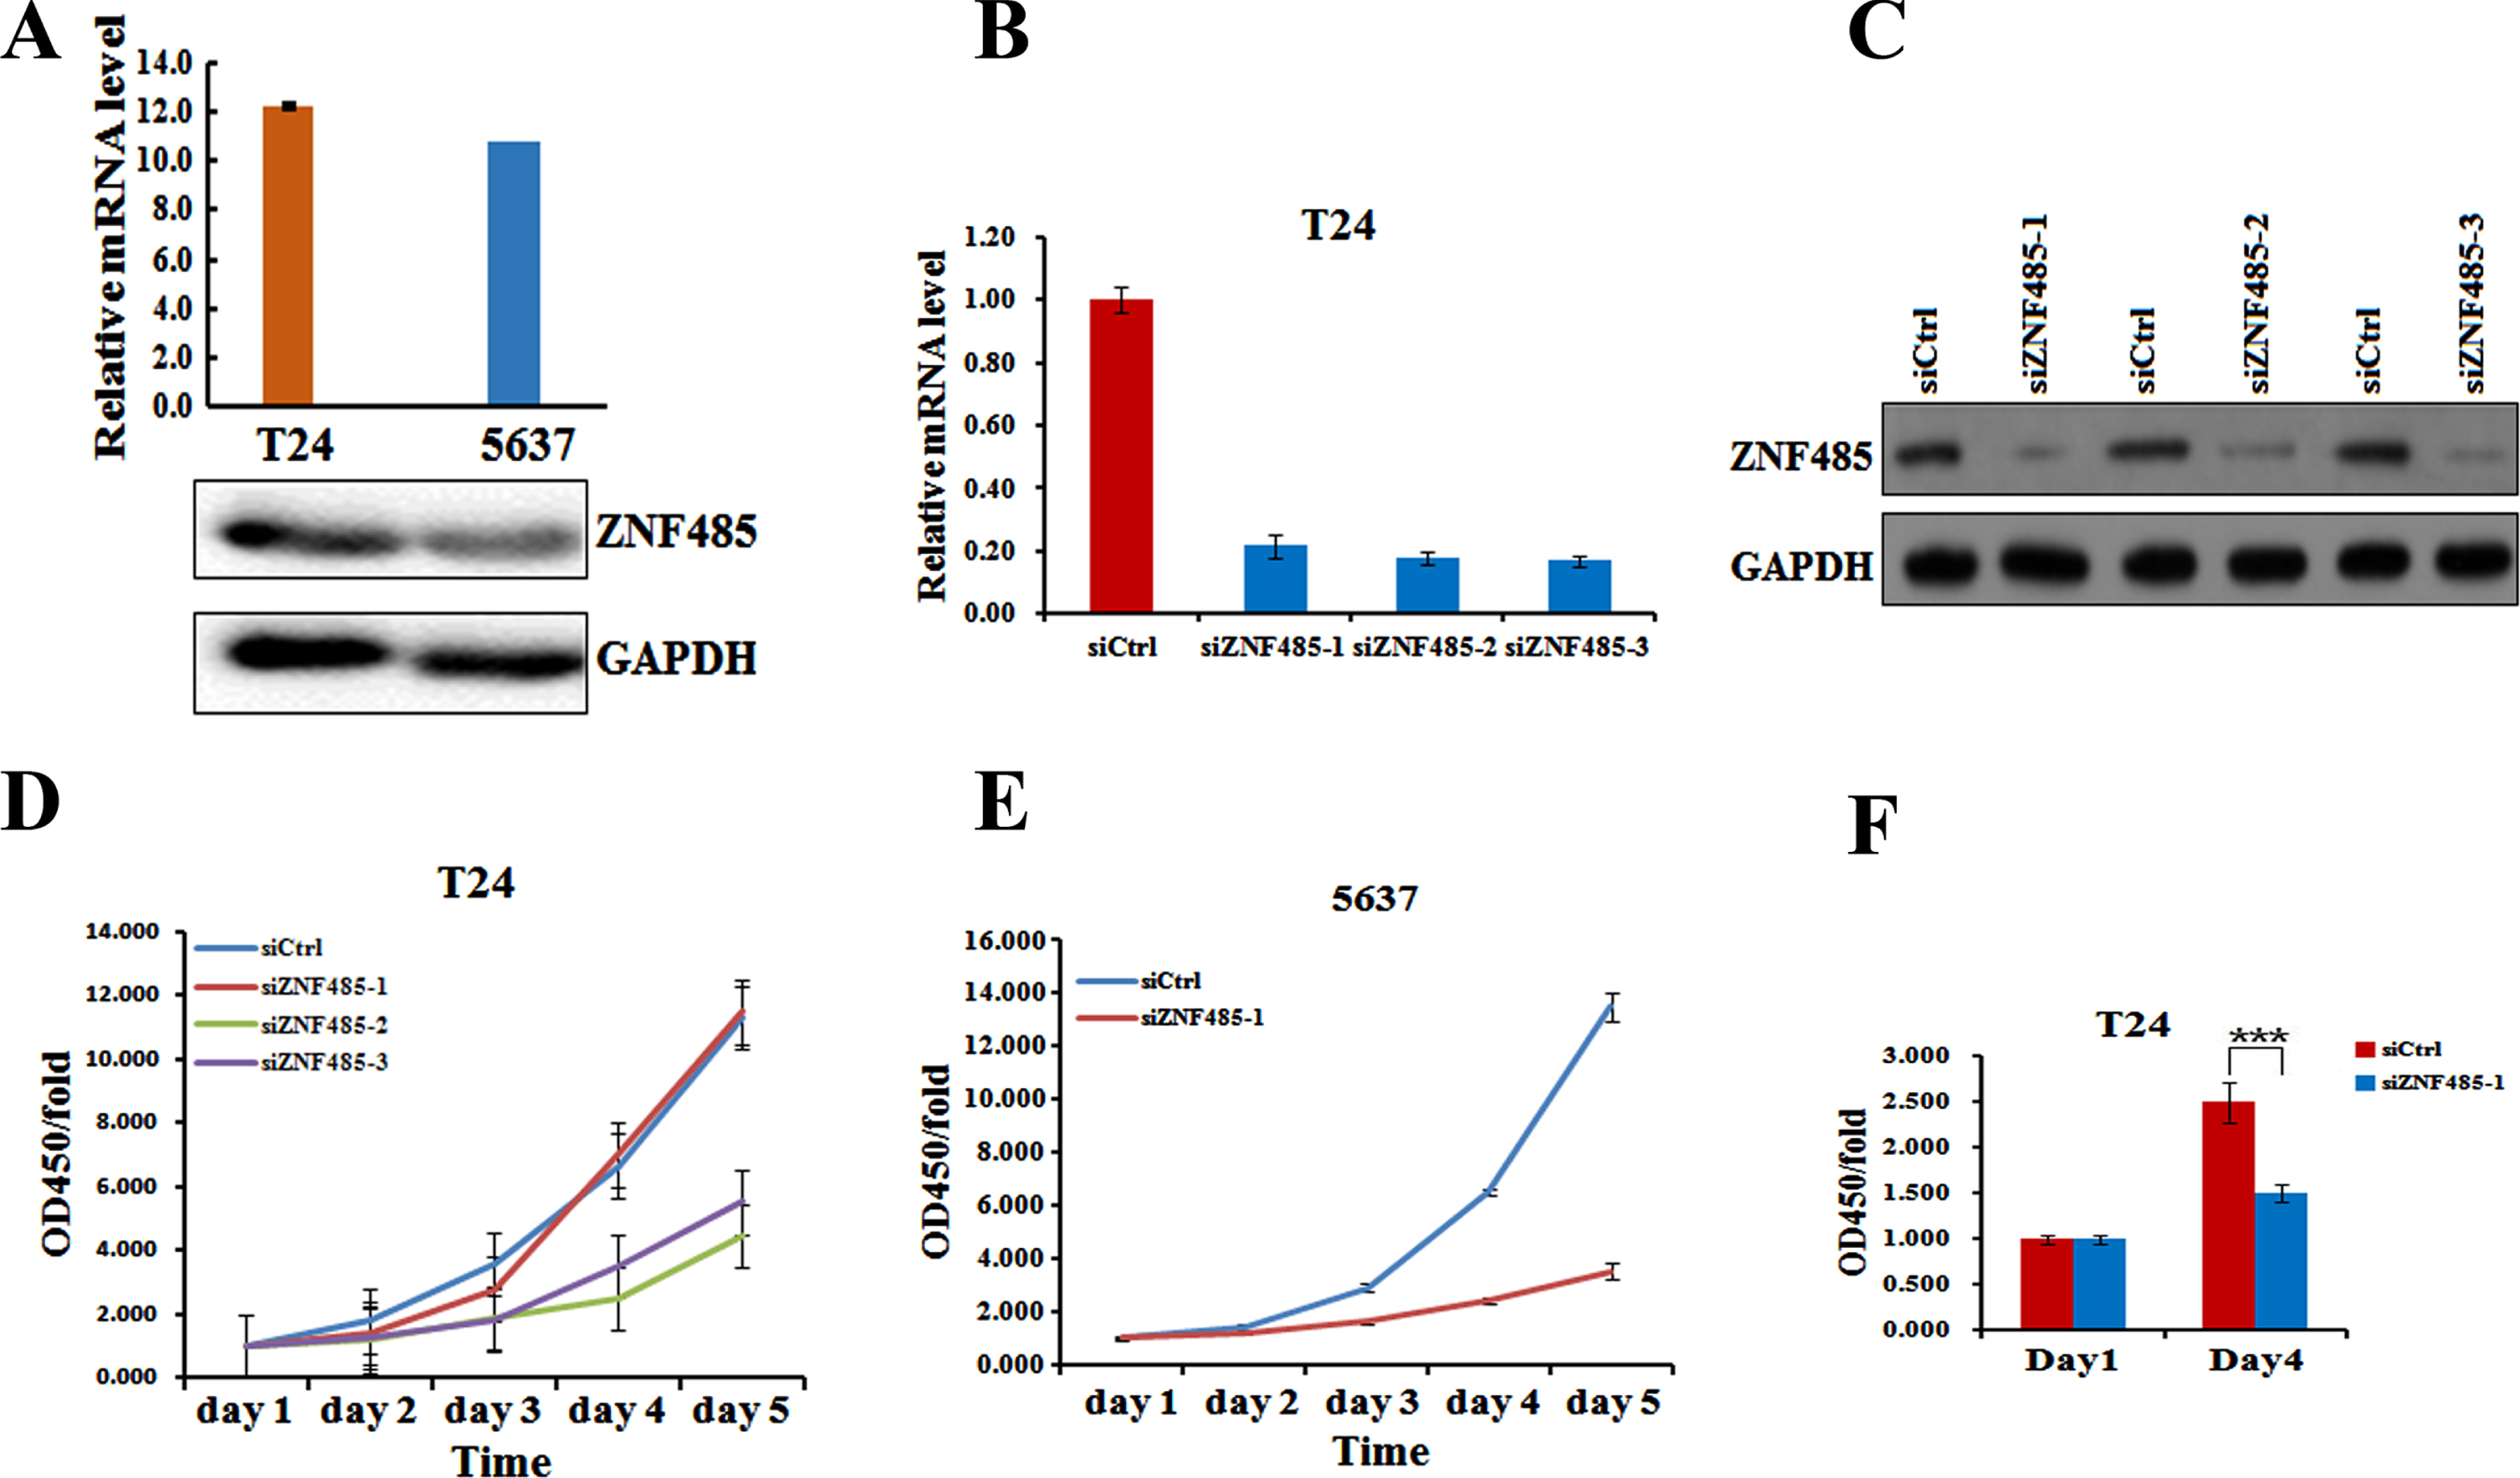 Knockdown of ZNF485 inhibits BLCA cell proliferation. (A) Levels of ZNF485 in BLCA 5637 and T24 cells measured by real-time PCR and western blot analyses. (B and C) The mRNA and protein levels of ZNF485 determined by (B) real-time PCR and (C) western blot analyses in three different regions of siRNAs transfected into T24 cells versus the negative control (siCtrl). (D) CCK-8 assays every 24 hours showed that ZNF485 inhibited the proliferation of T24 cells transfected with three different regions of siRNAs versus the negative control (siCtrl). (E) CCK-8 assays every 24 hours showed that ZNF485 inhibited the proliferation of 5637 cells transfected with ZNF485knockdown versus the negative control (siCtrl). (F) ZNF485 inhibited cell proliferation, as shown by EdU staining assays, in T24 cells transfected with ZNF485 knockdown versus the negative control (siCtrl). ***, p value < 0.001.